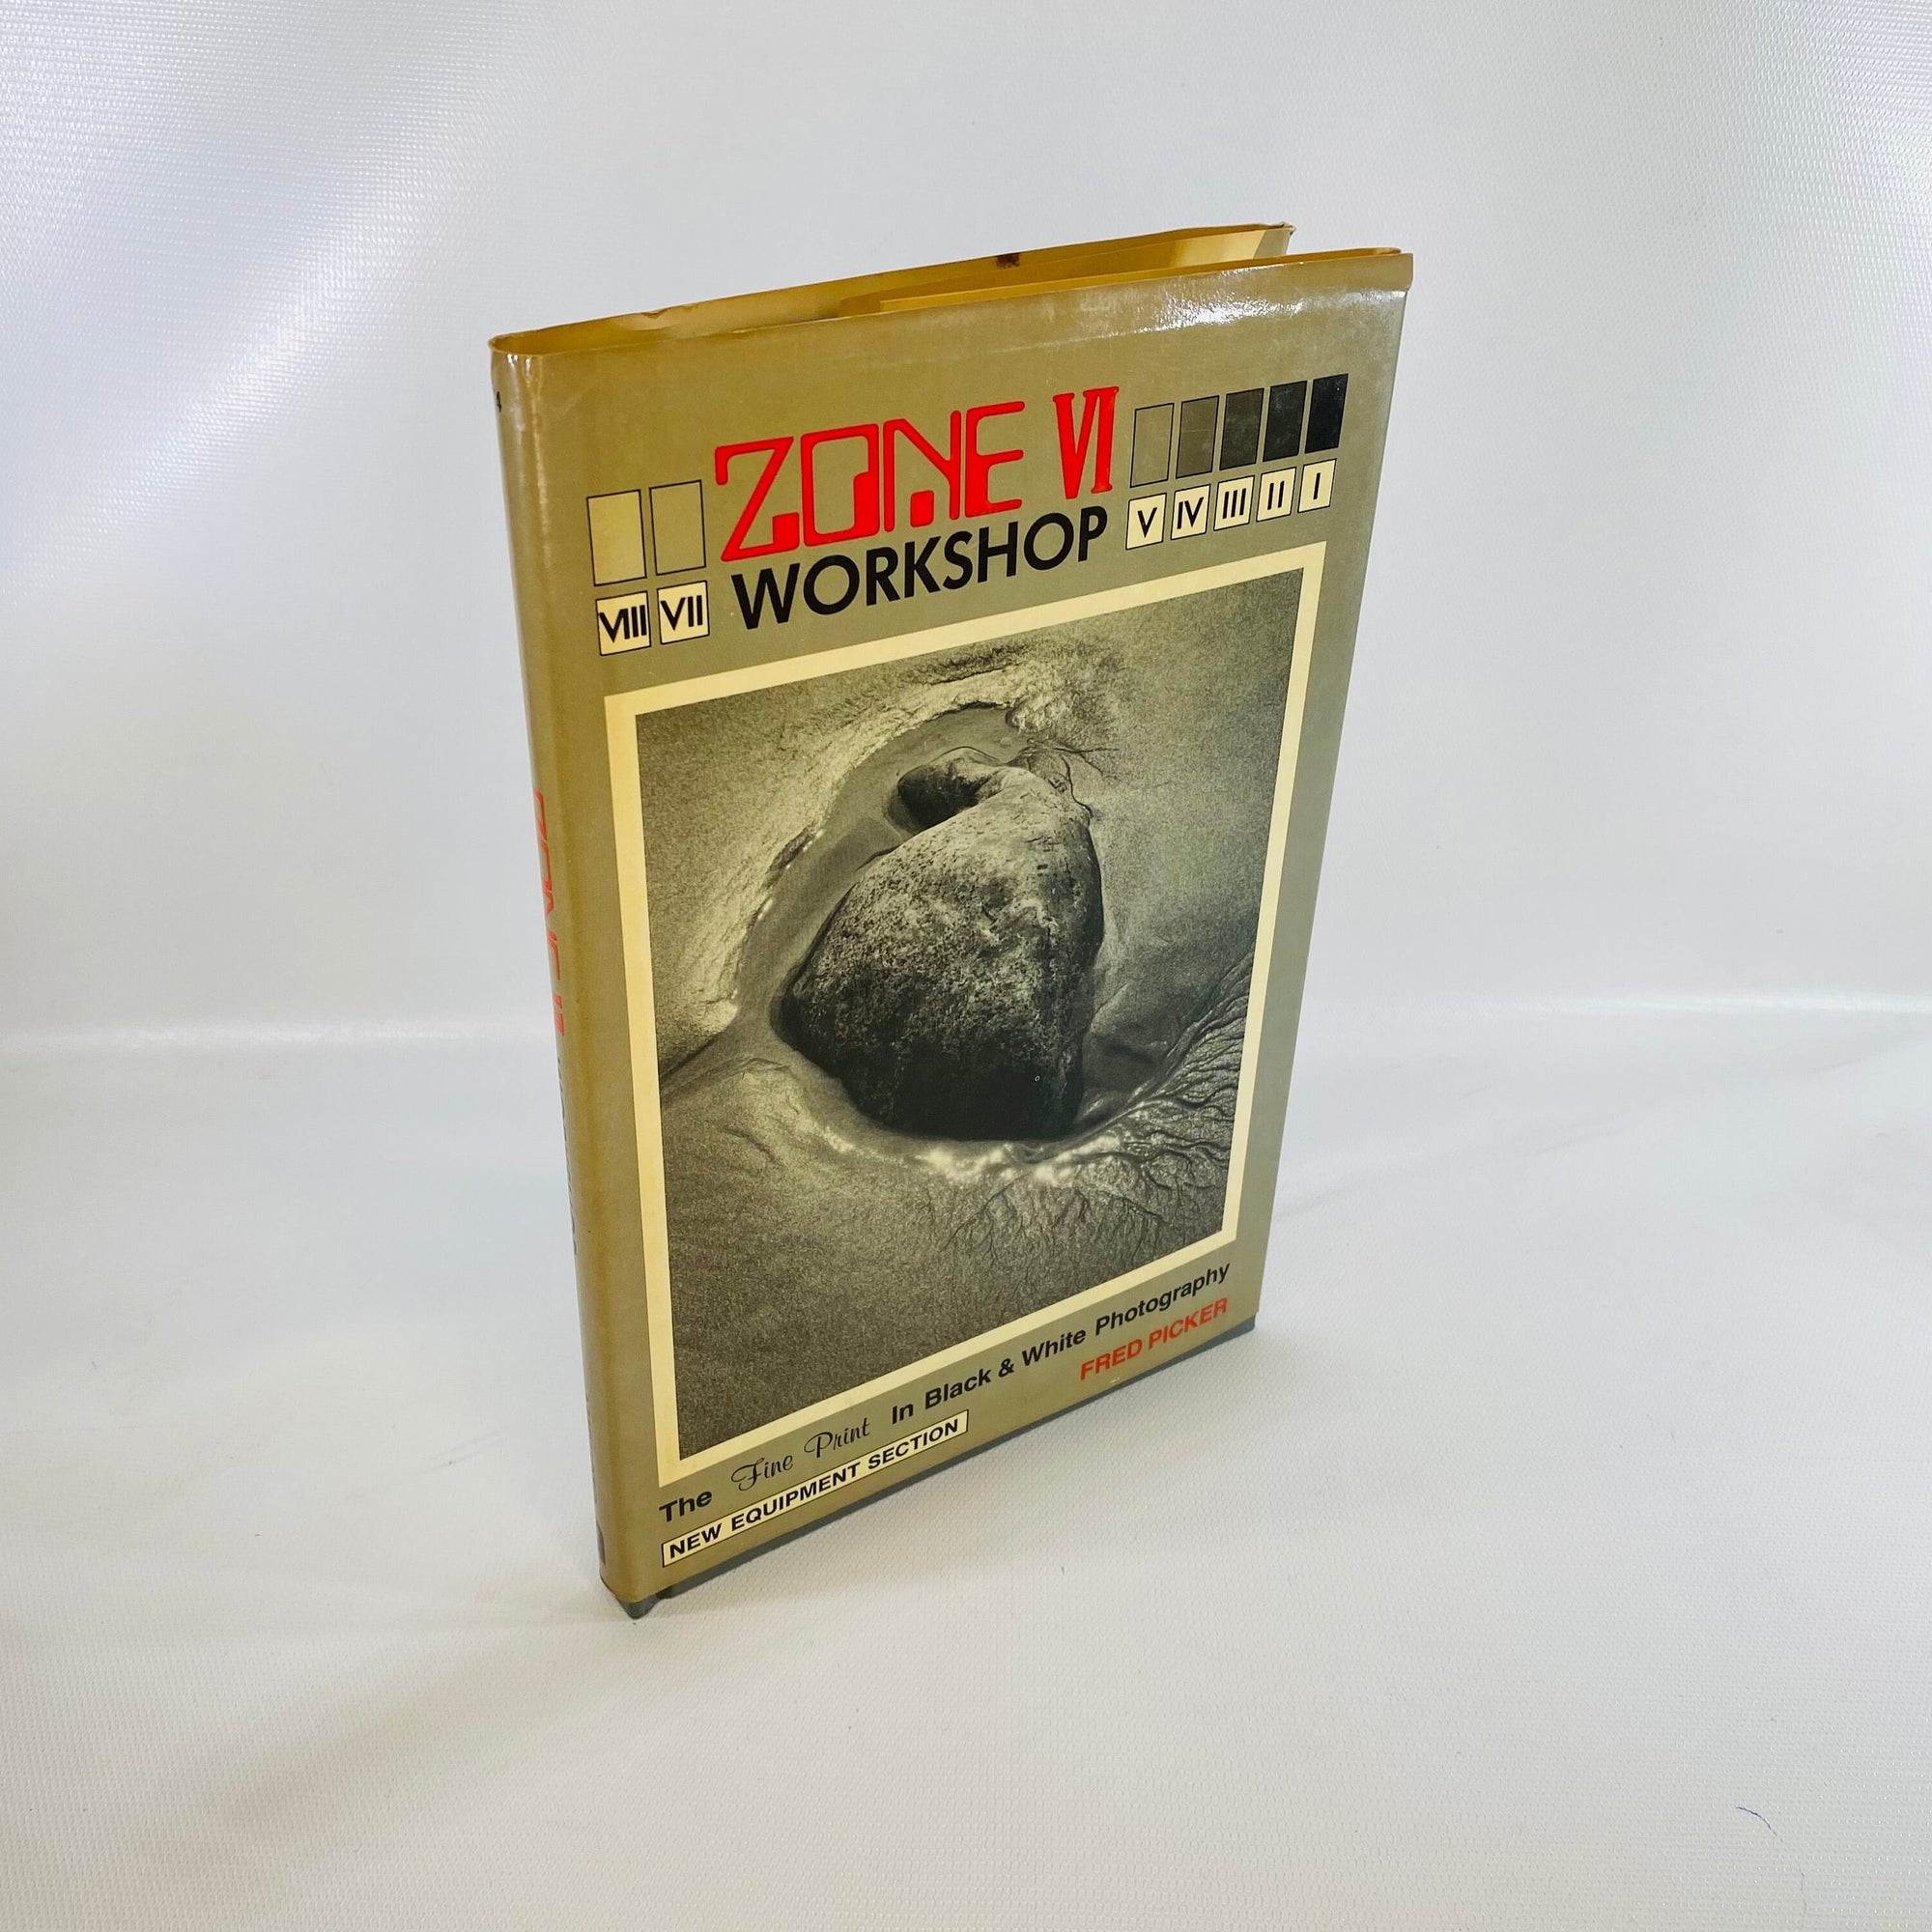 Zone VI Workshop The Fine Print in Black & White Photography by Fred Picker 1974 Vintage Book